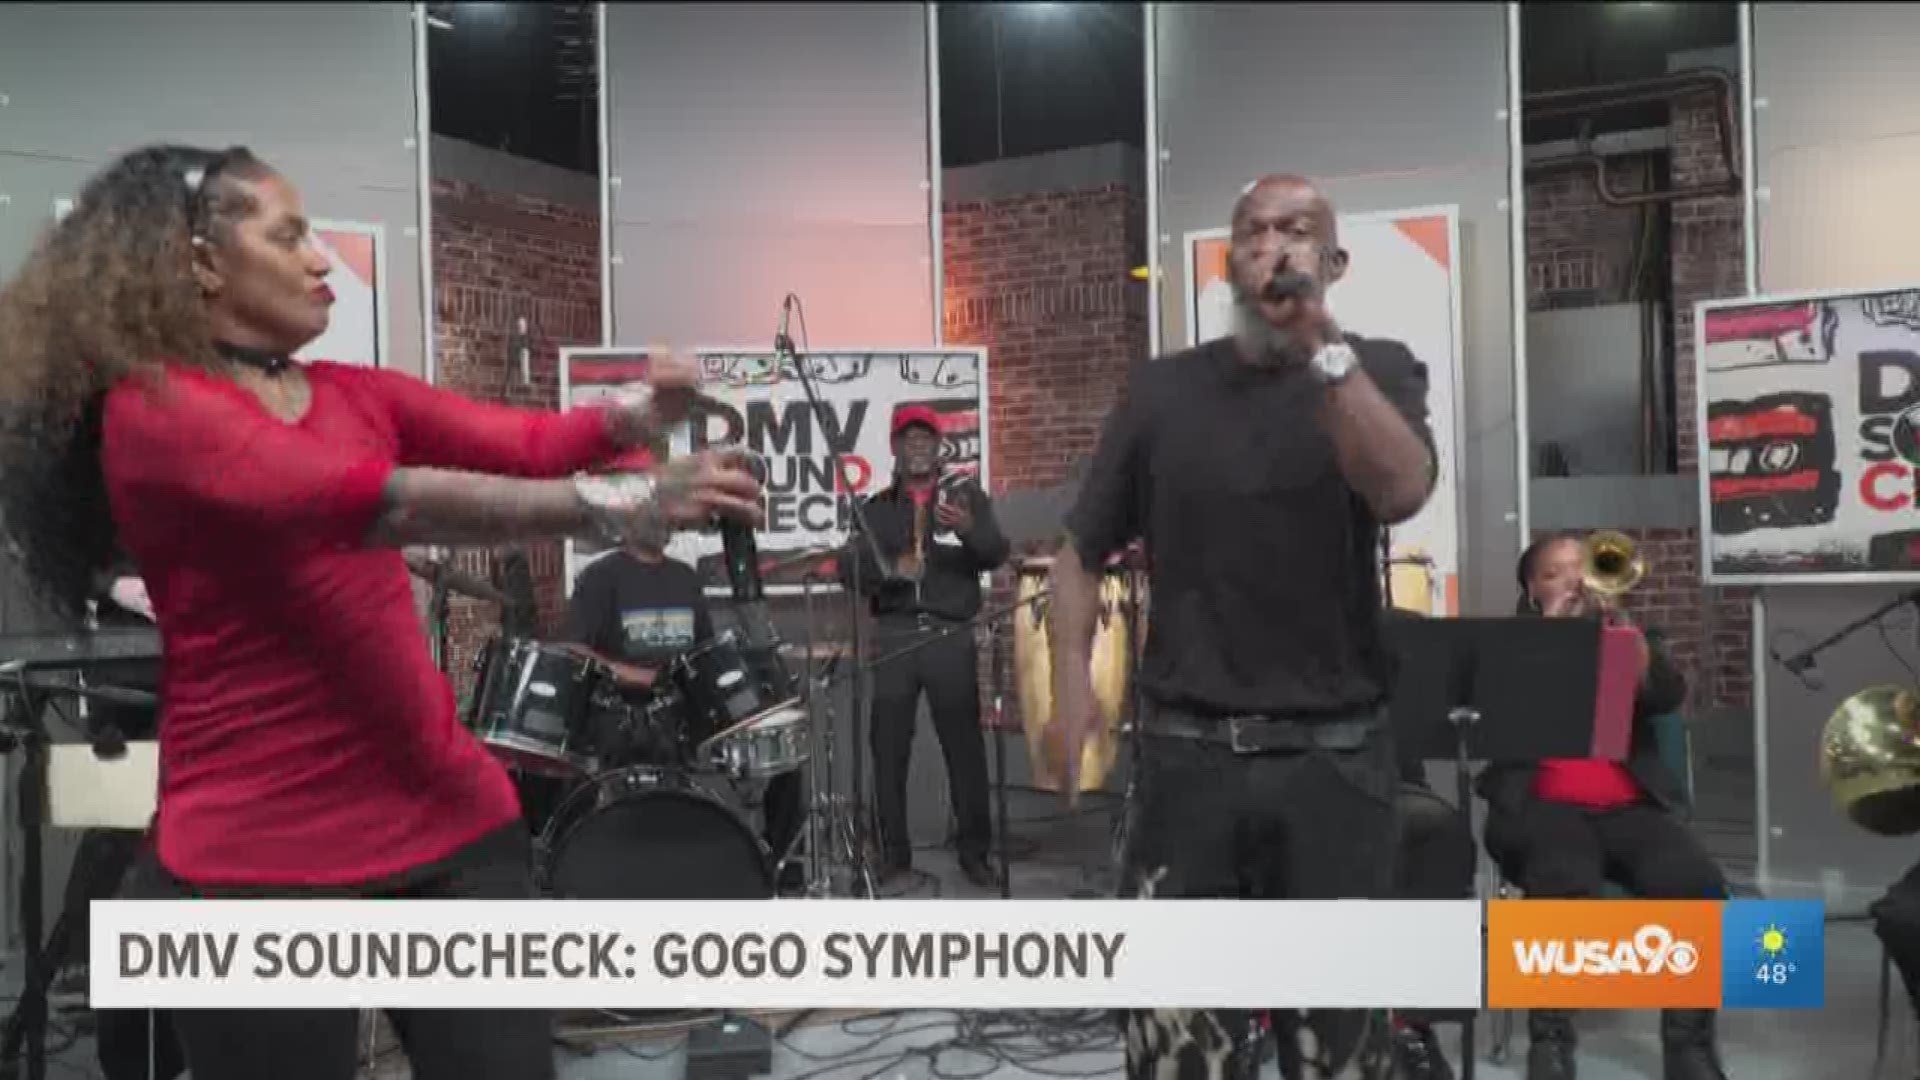 The GoGo Symphony mixes classical music with DC's legendary GoGo beats. They perform "Fight the Power" live.